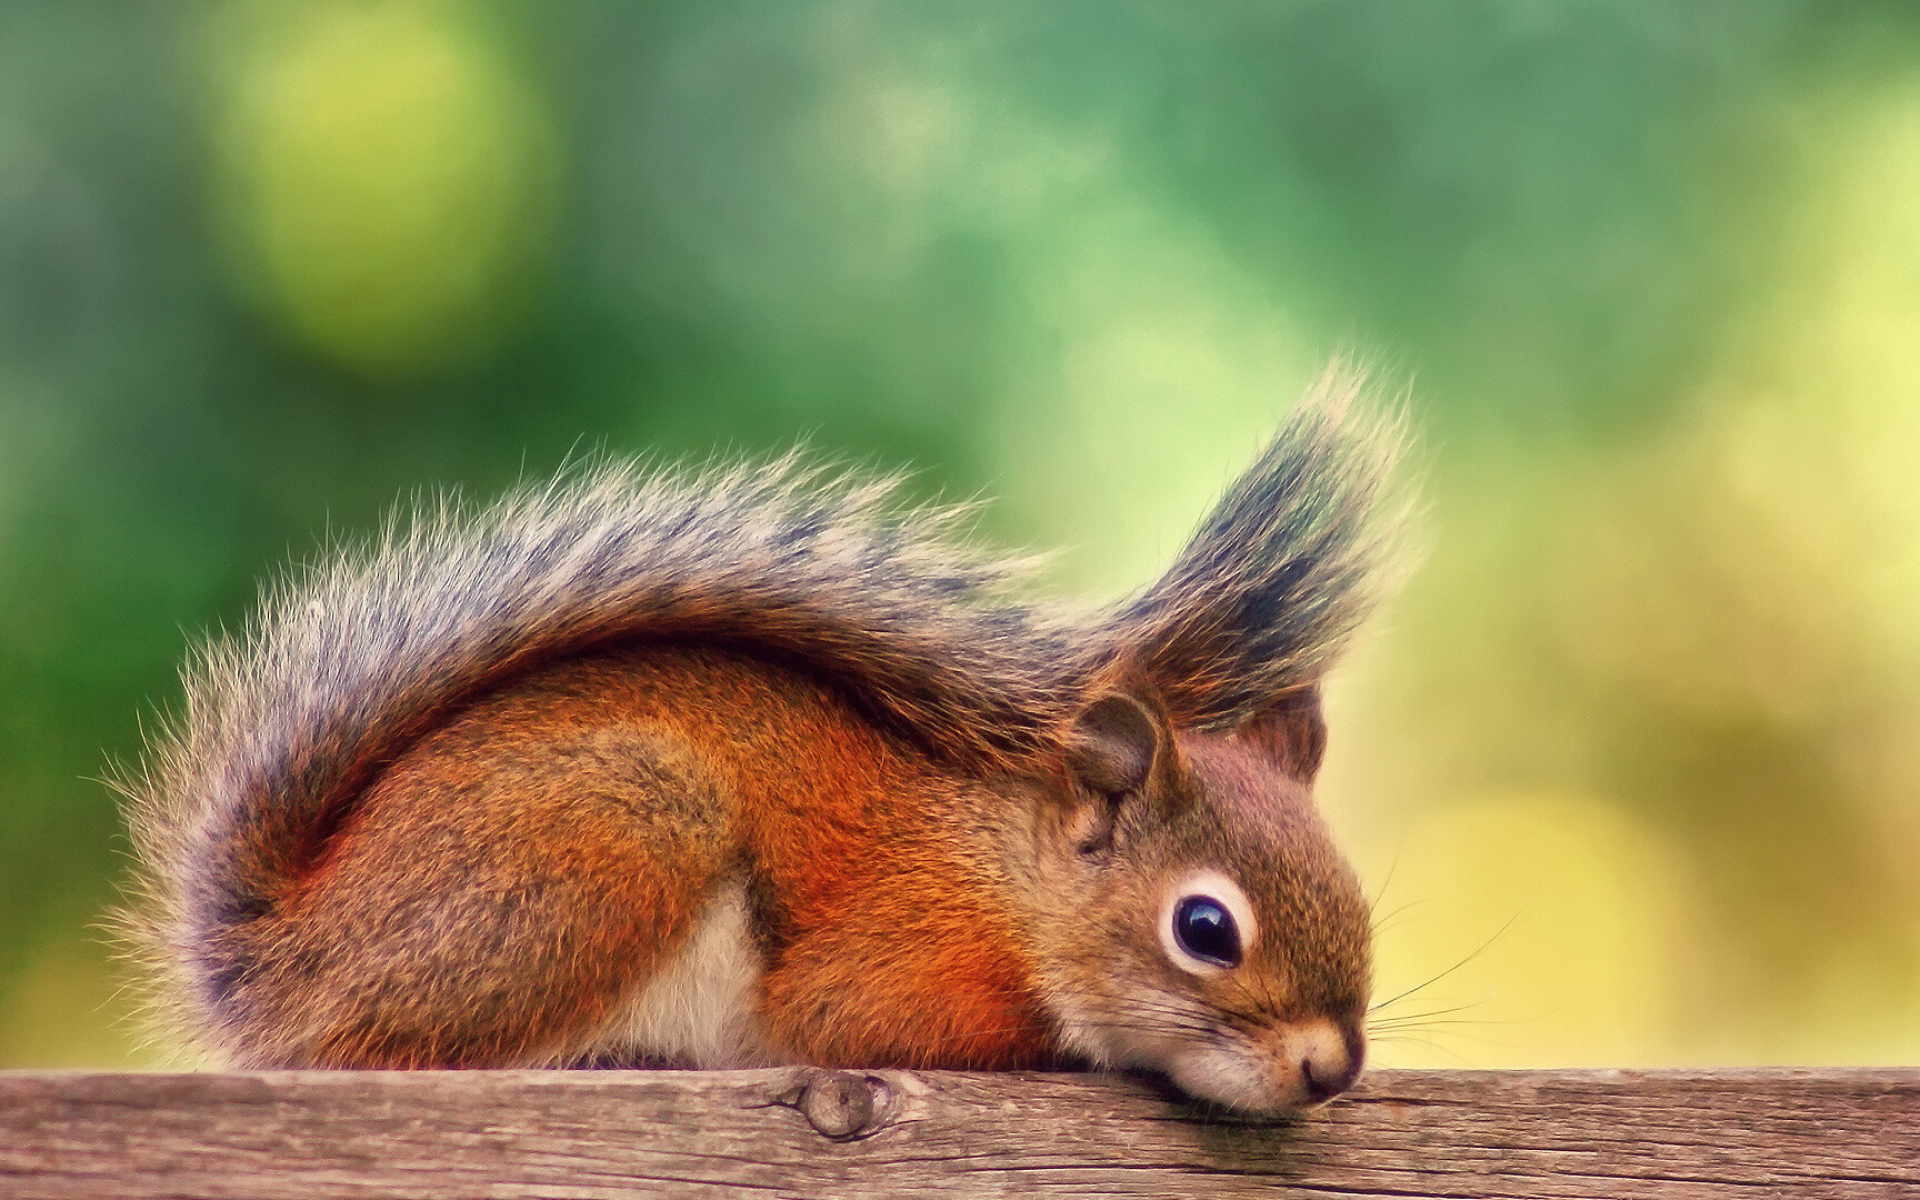 Squirrel: Bushy-tailed rodents found all over the world. 1920x1200 HD Wallpaper.